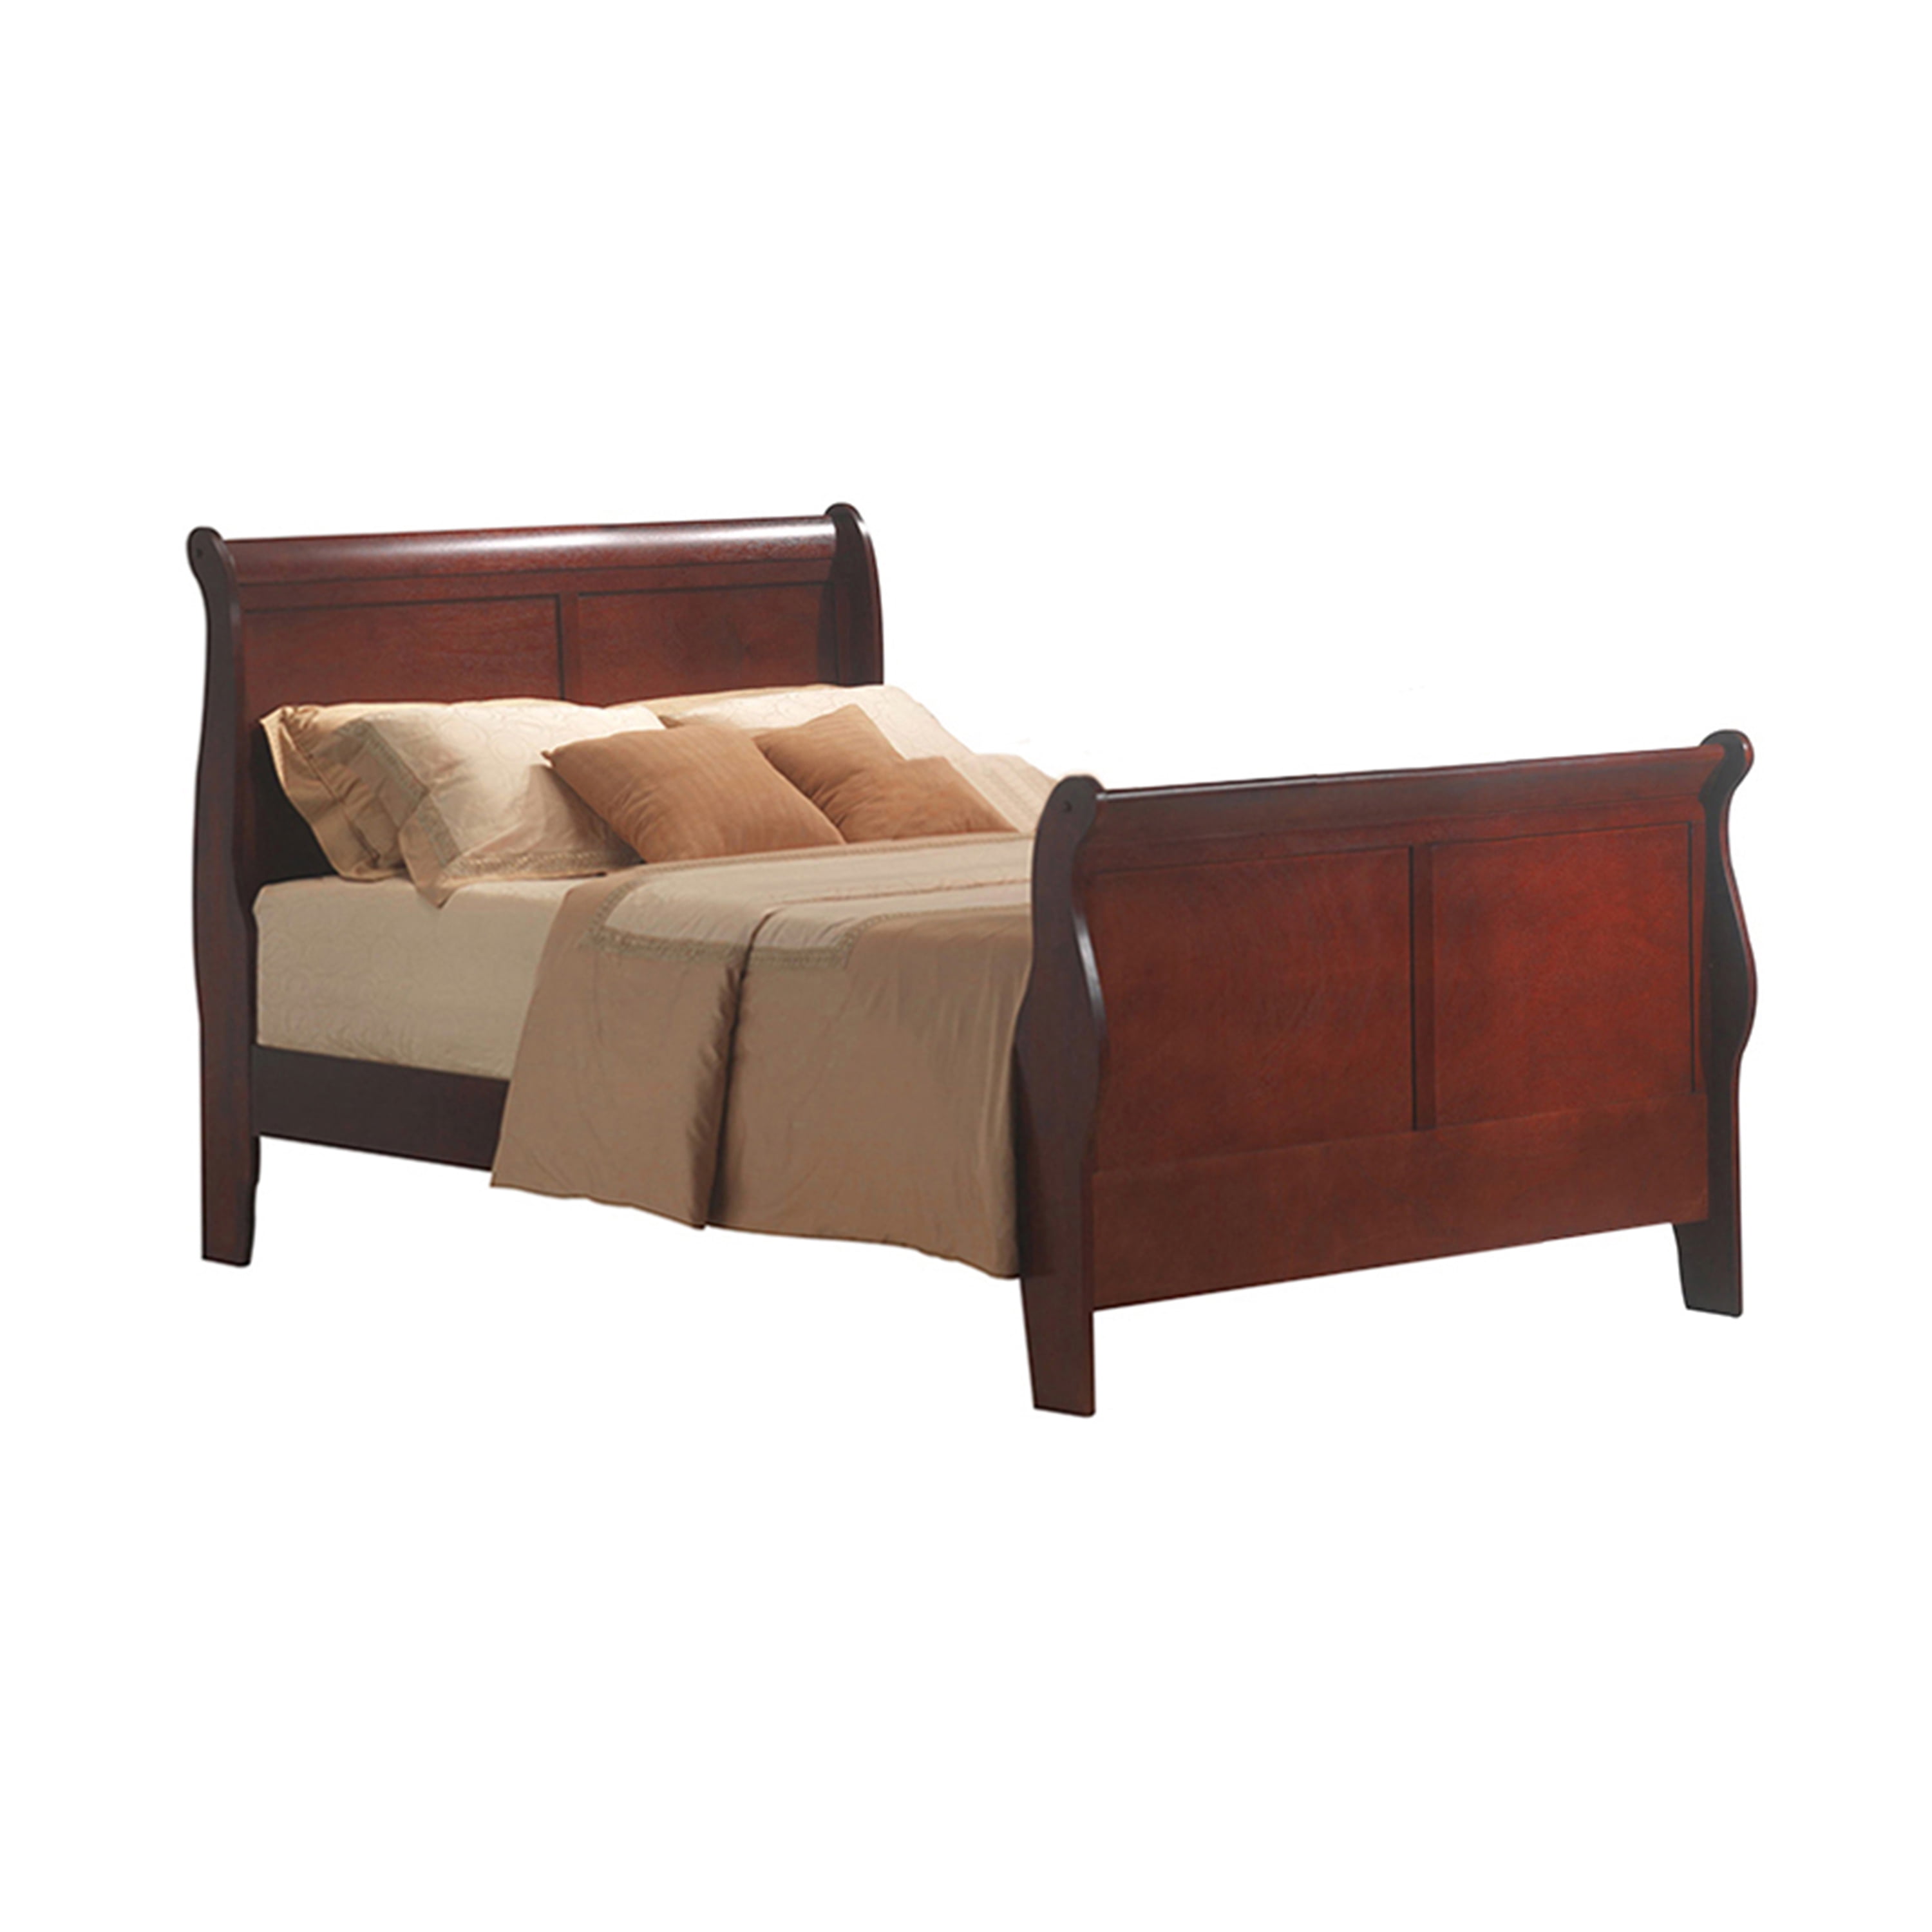 Acme Louis Philippe Iii Twin Sleigh Bed, King Size Pine Sleigh Bed